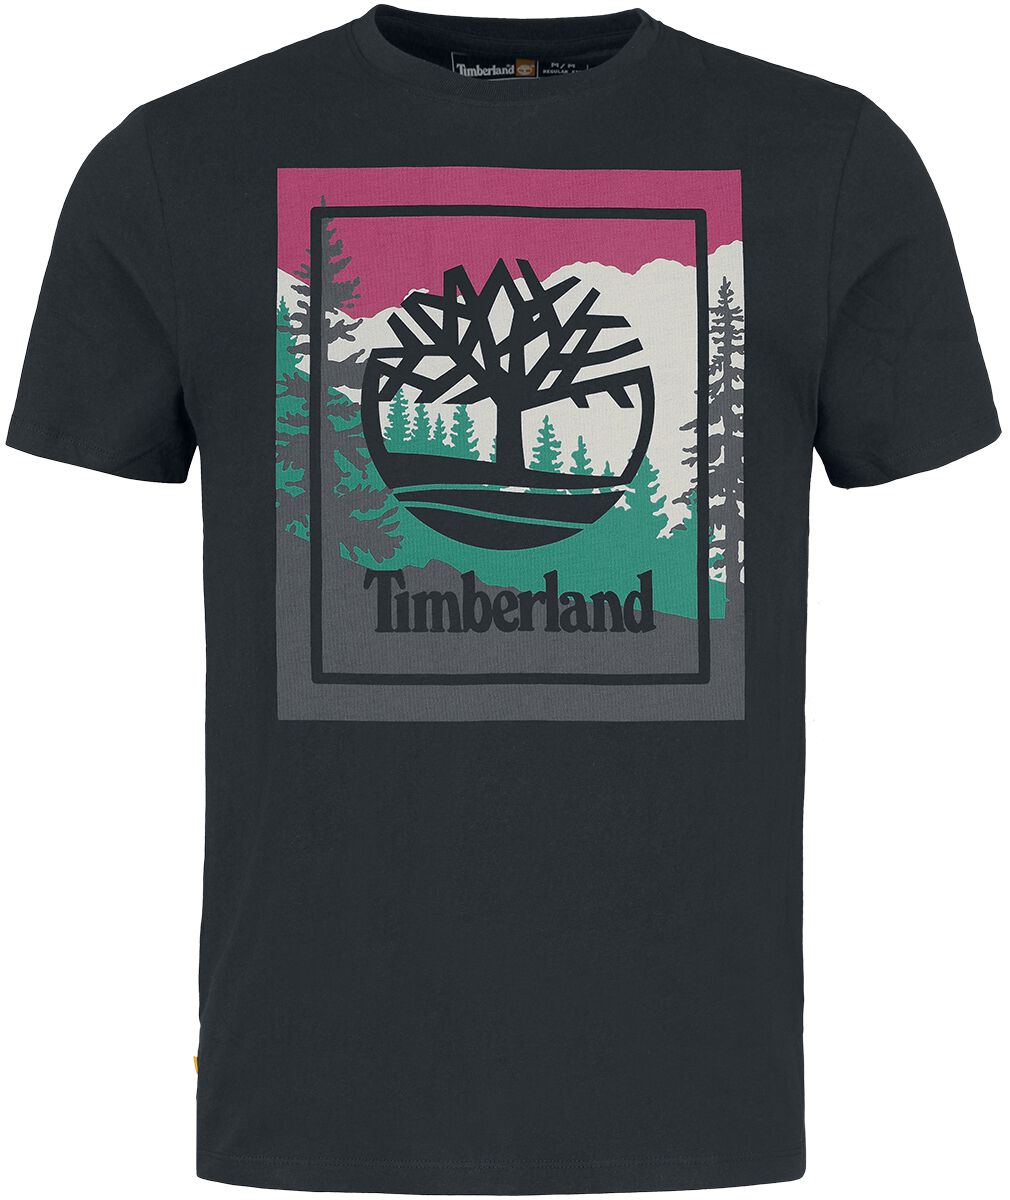 Image of T-Shirt di Timberland - Outdoor inspired graphic t-shirt - S a L - Uomo - nero